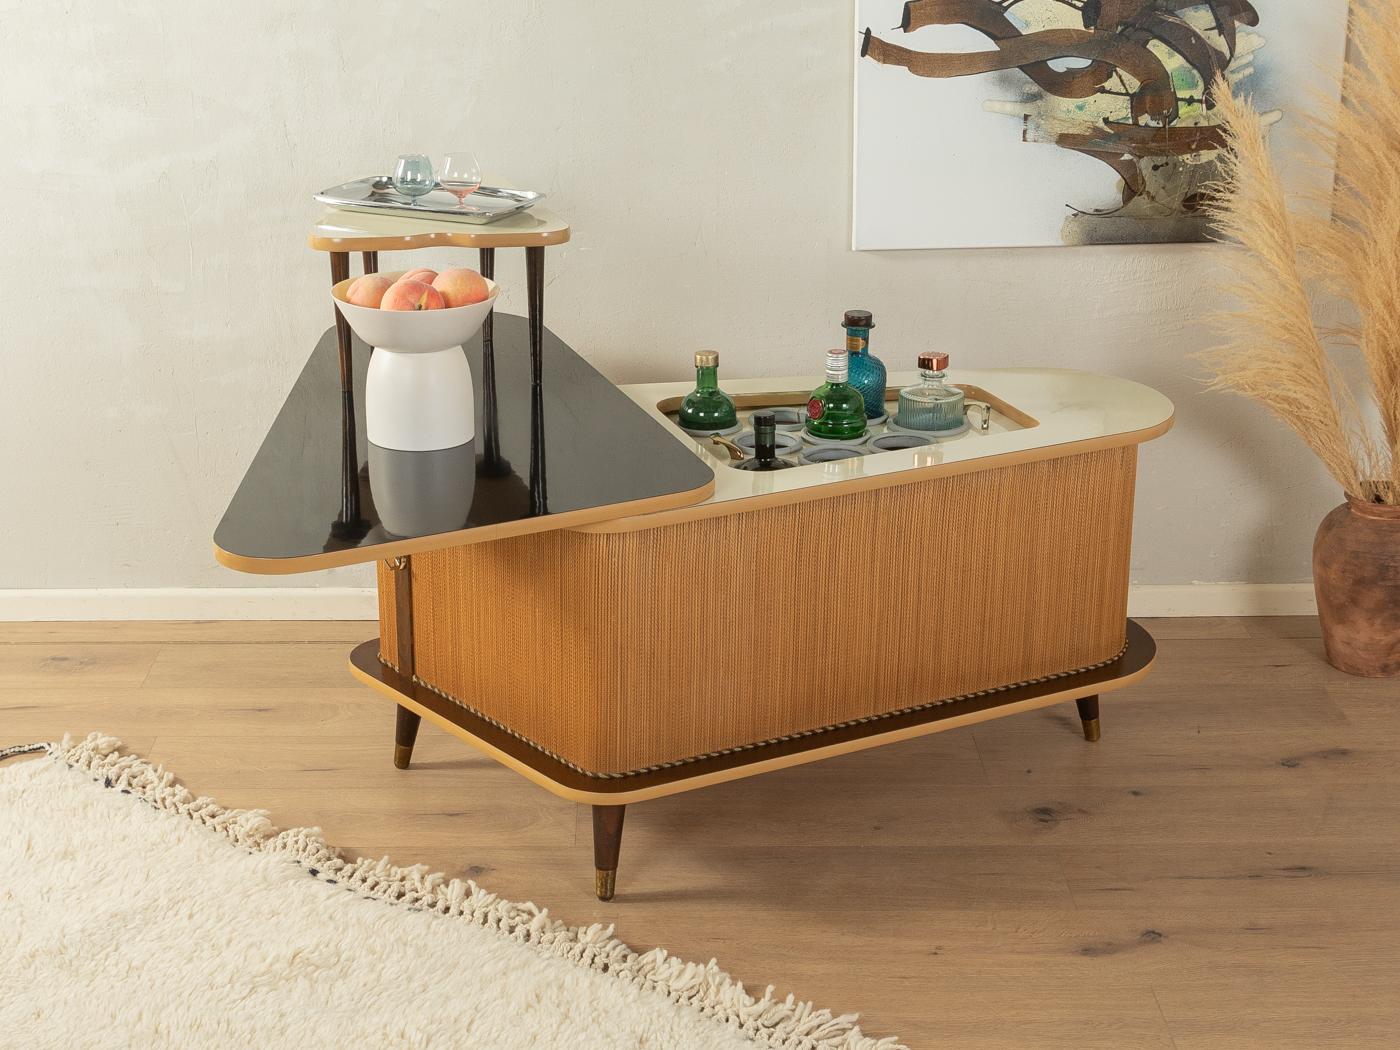 Unique home bar from the 1950s. Corpus with original rattan braid, decorative trims, a bar compartment with glass and bottle holders, a removable side table and slanted feet with brass caps. Surfaces with original Formica coating in black and cream